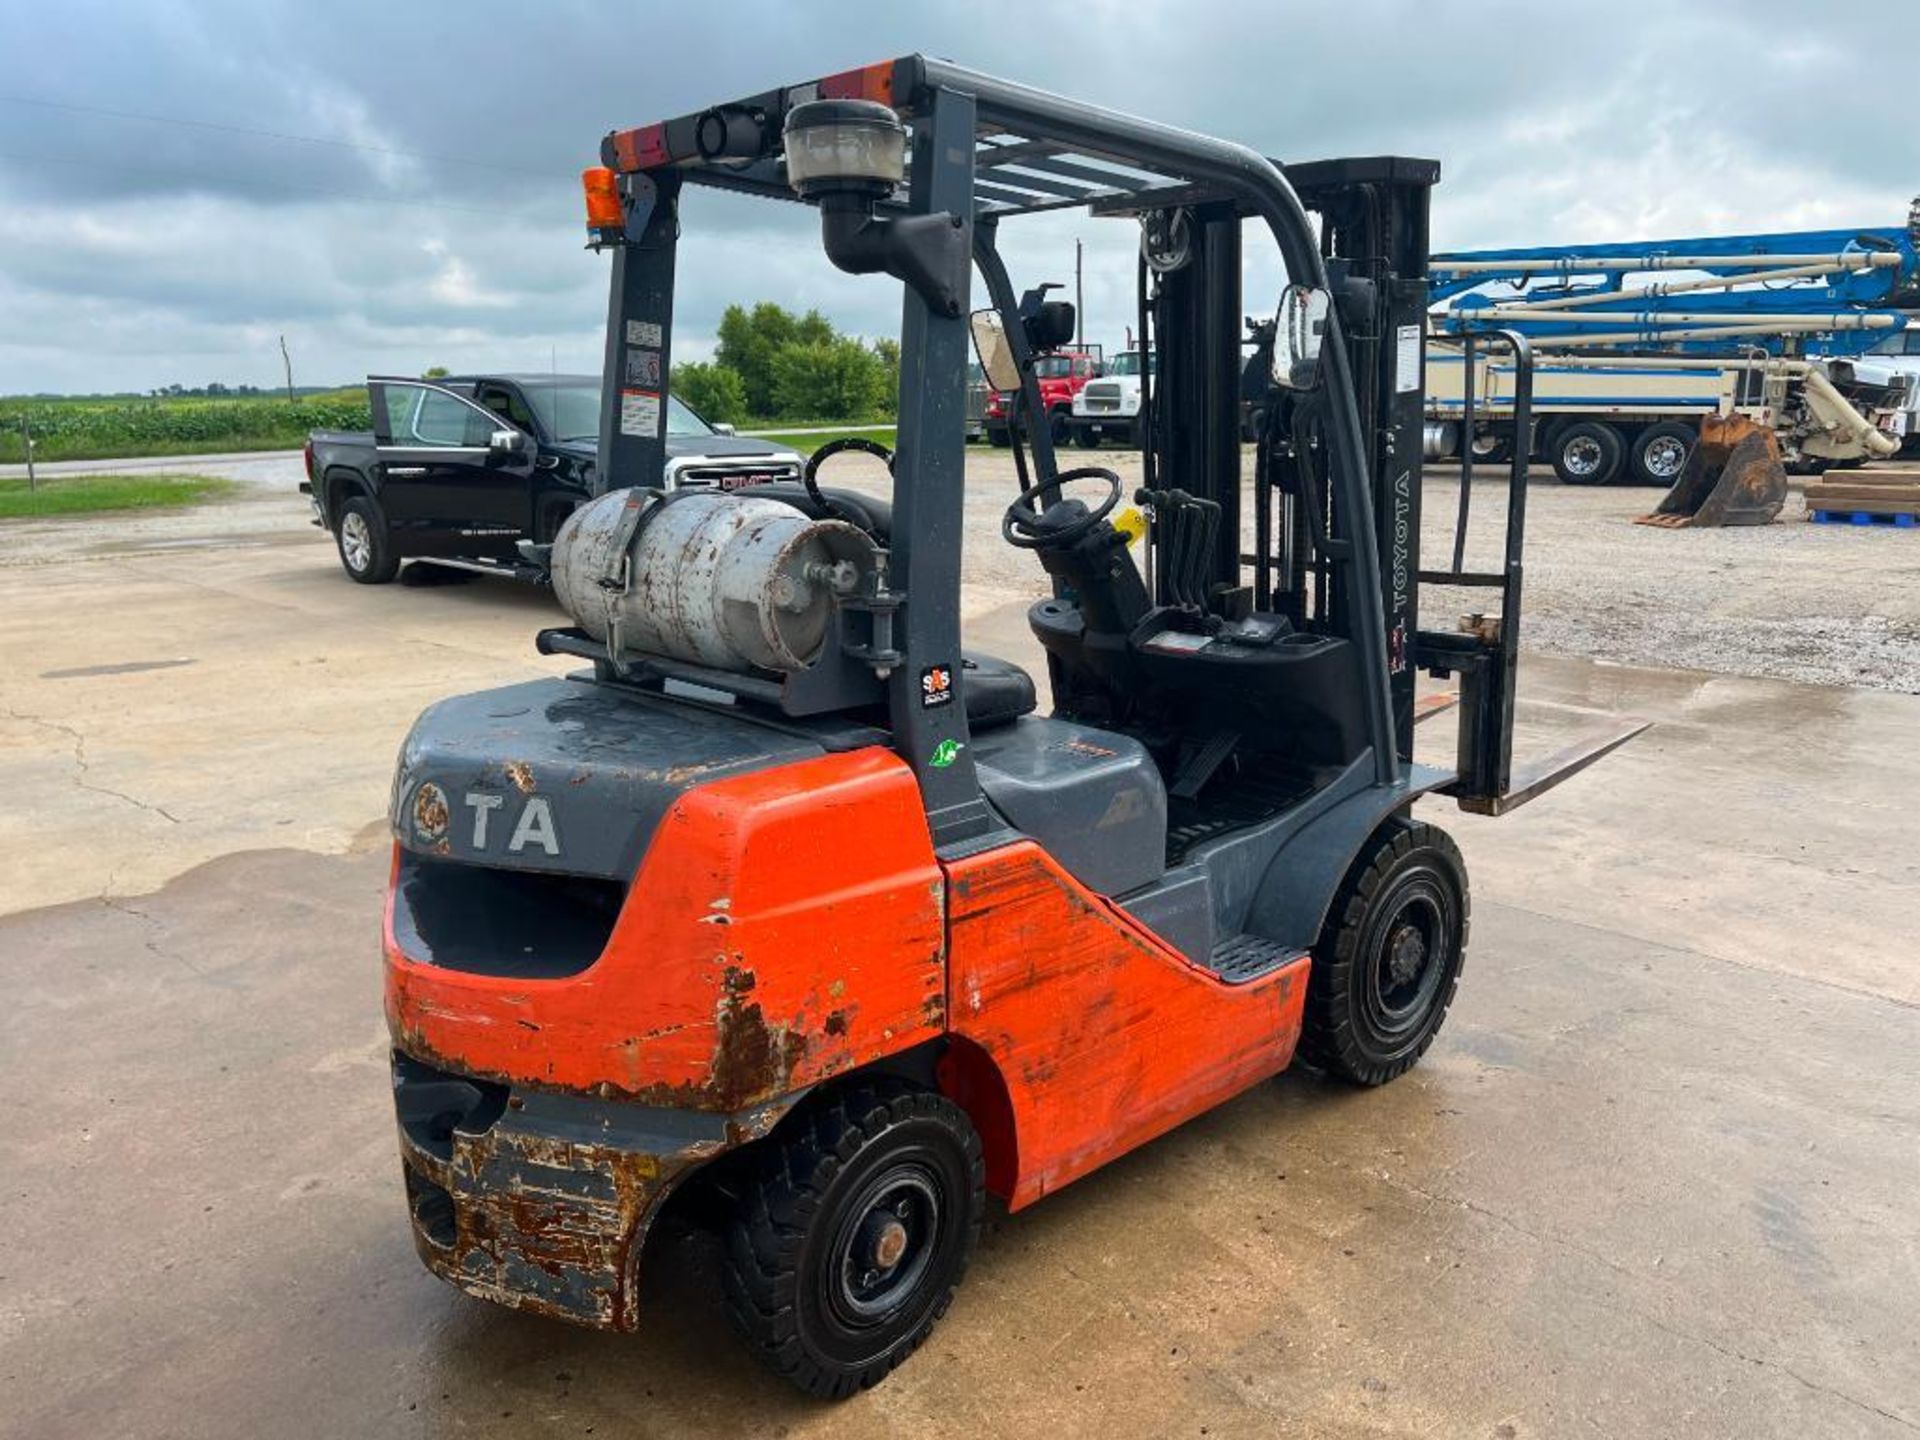 Toyota Forklift Truck, Model 8FGU25, Hours 5,264, LP. Located in Altamont, IL - Image 5 of 19